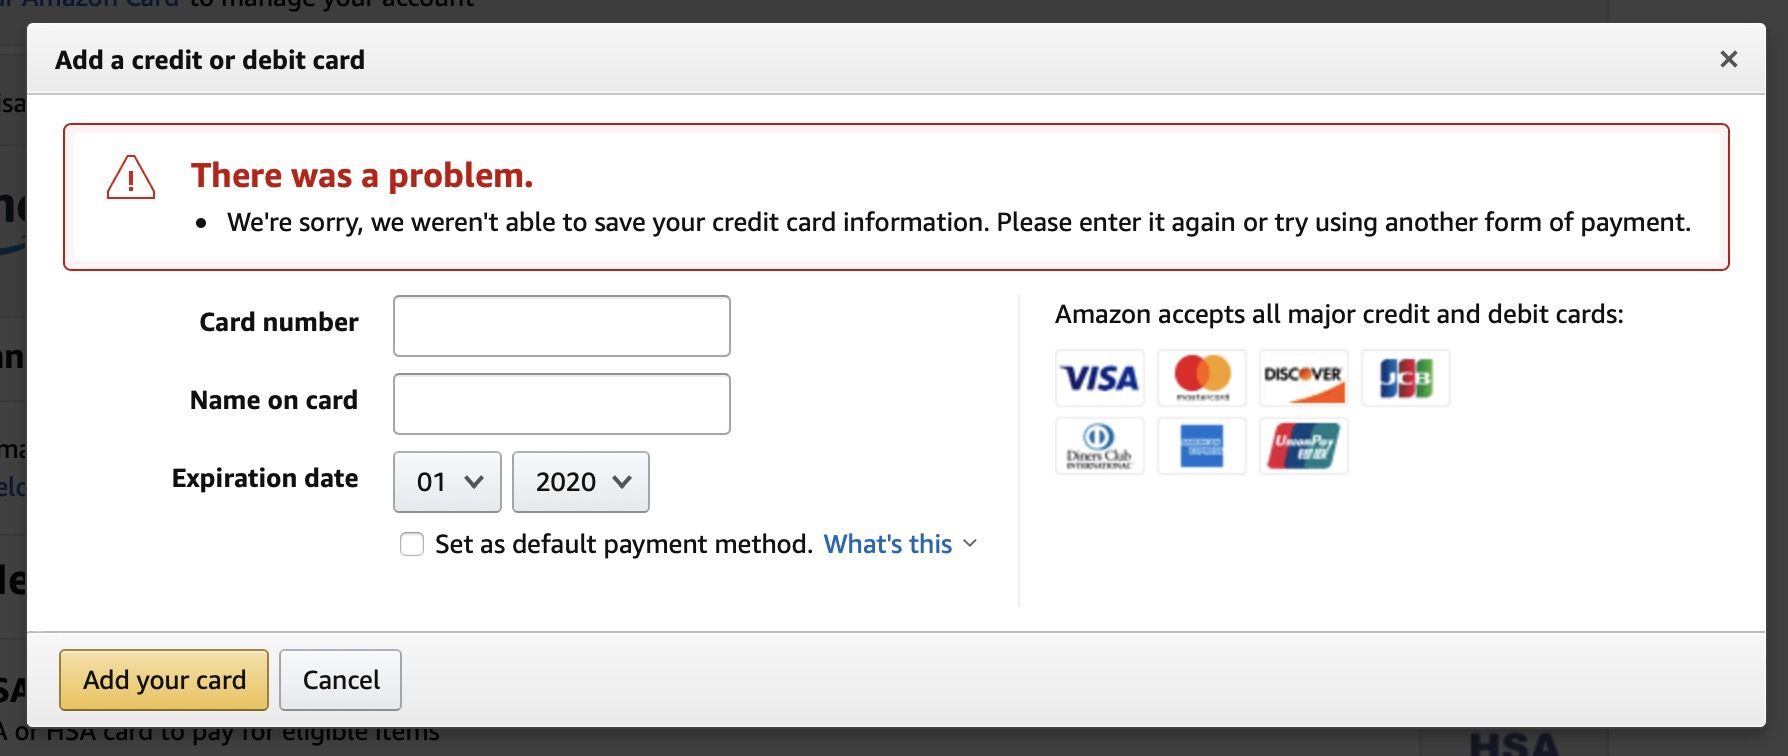 photo of Amazon Inexplicably Removes Apple Card From Payment Options image